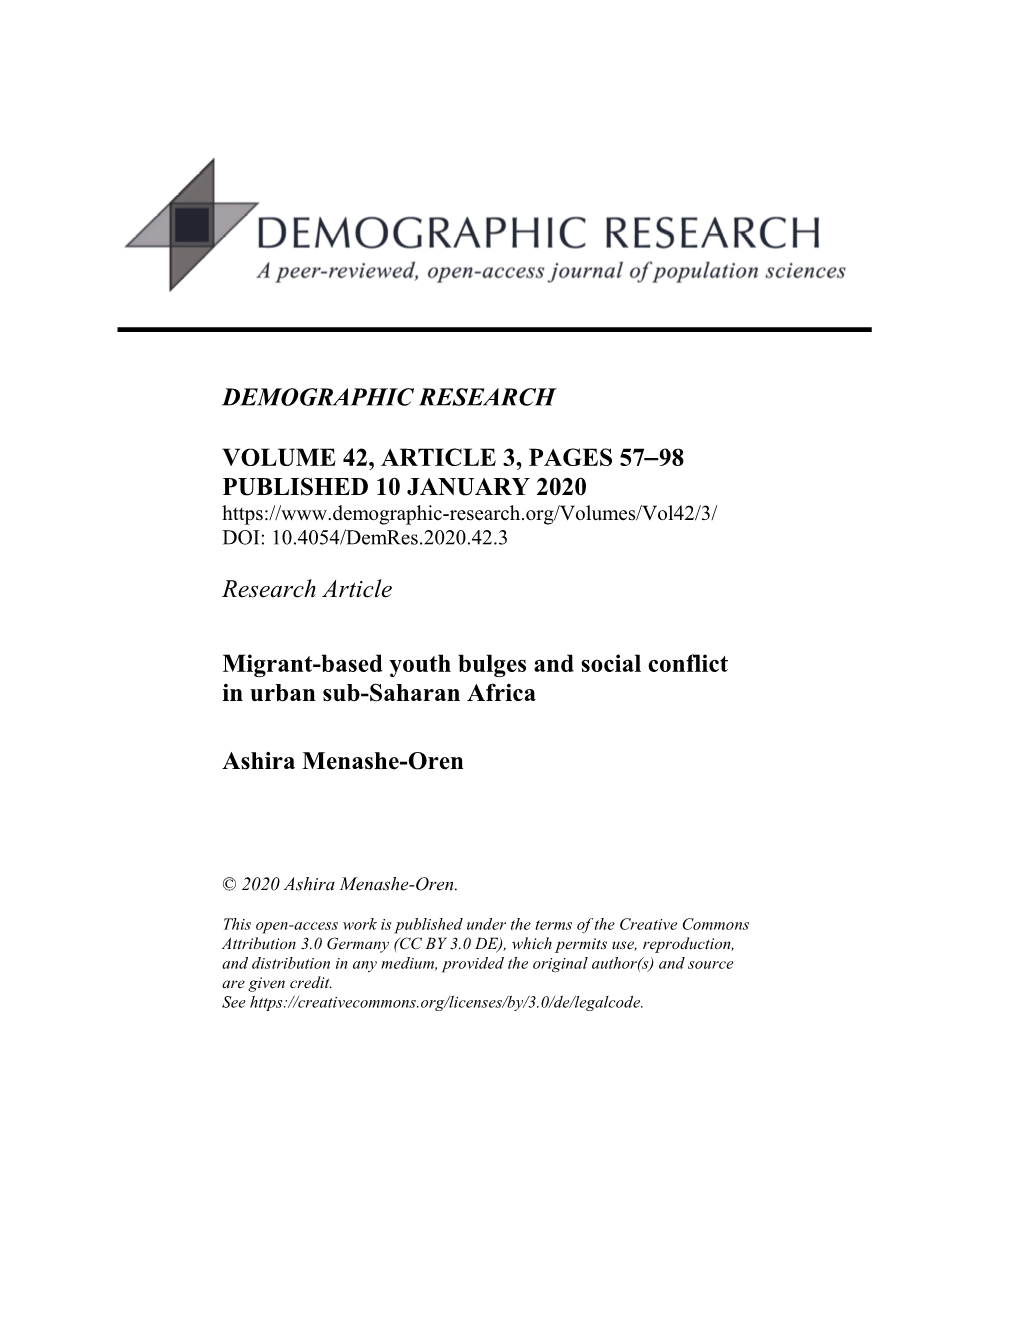 Migrant-Based Youth Bulges and Social Conflict in Urban Sub-Saharan Africa